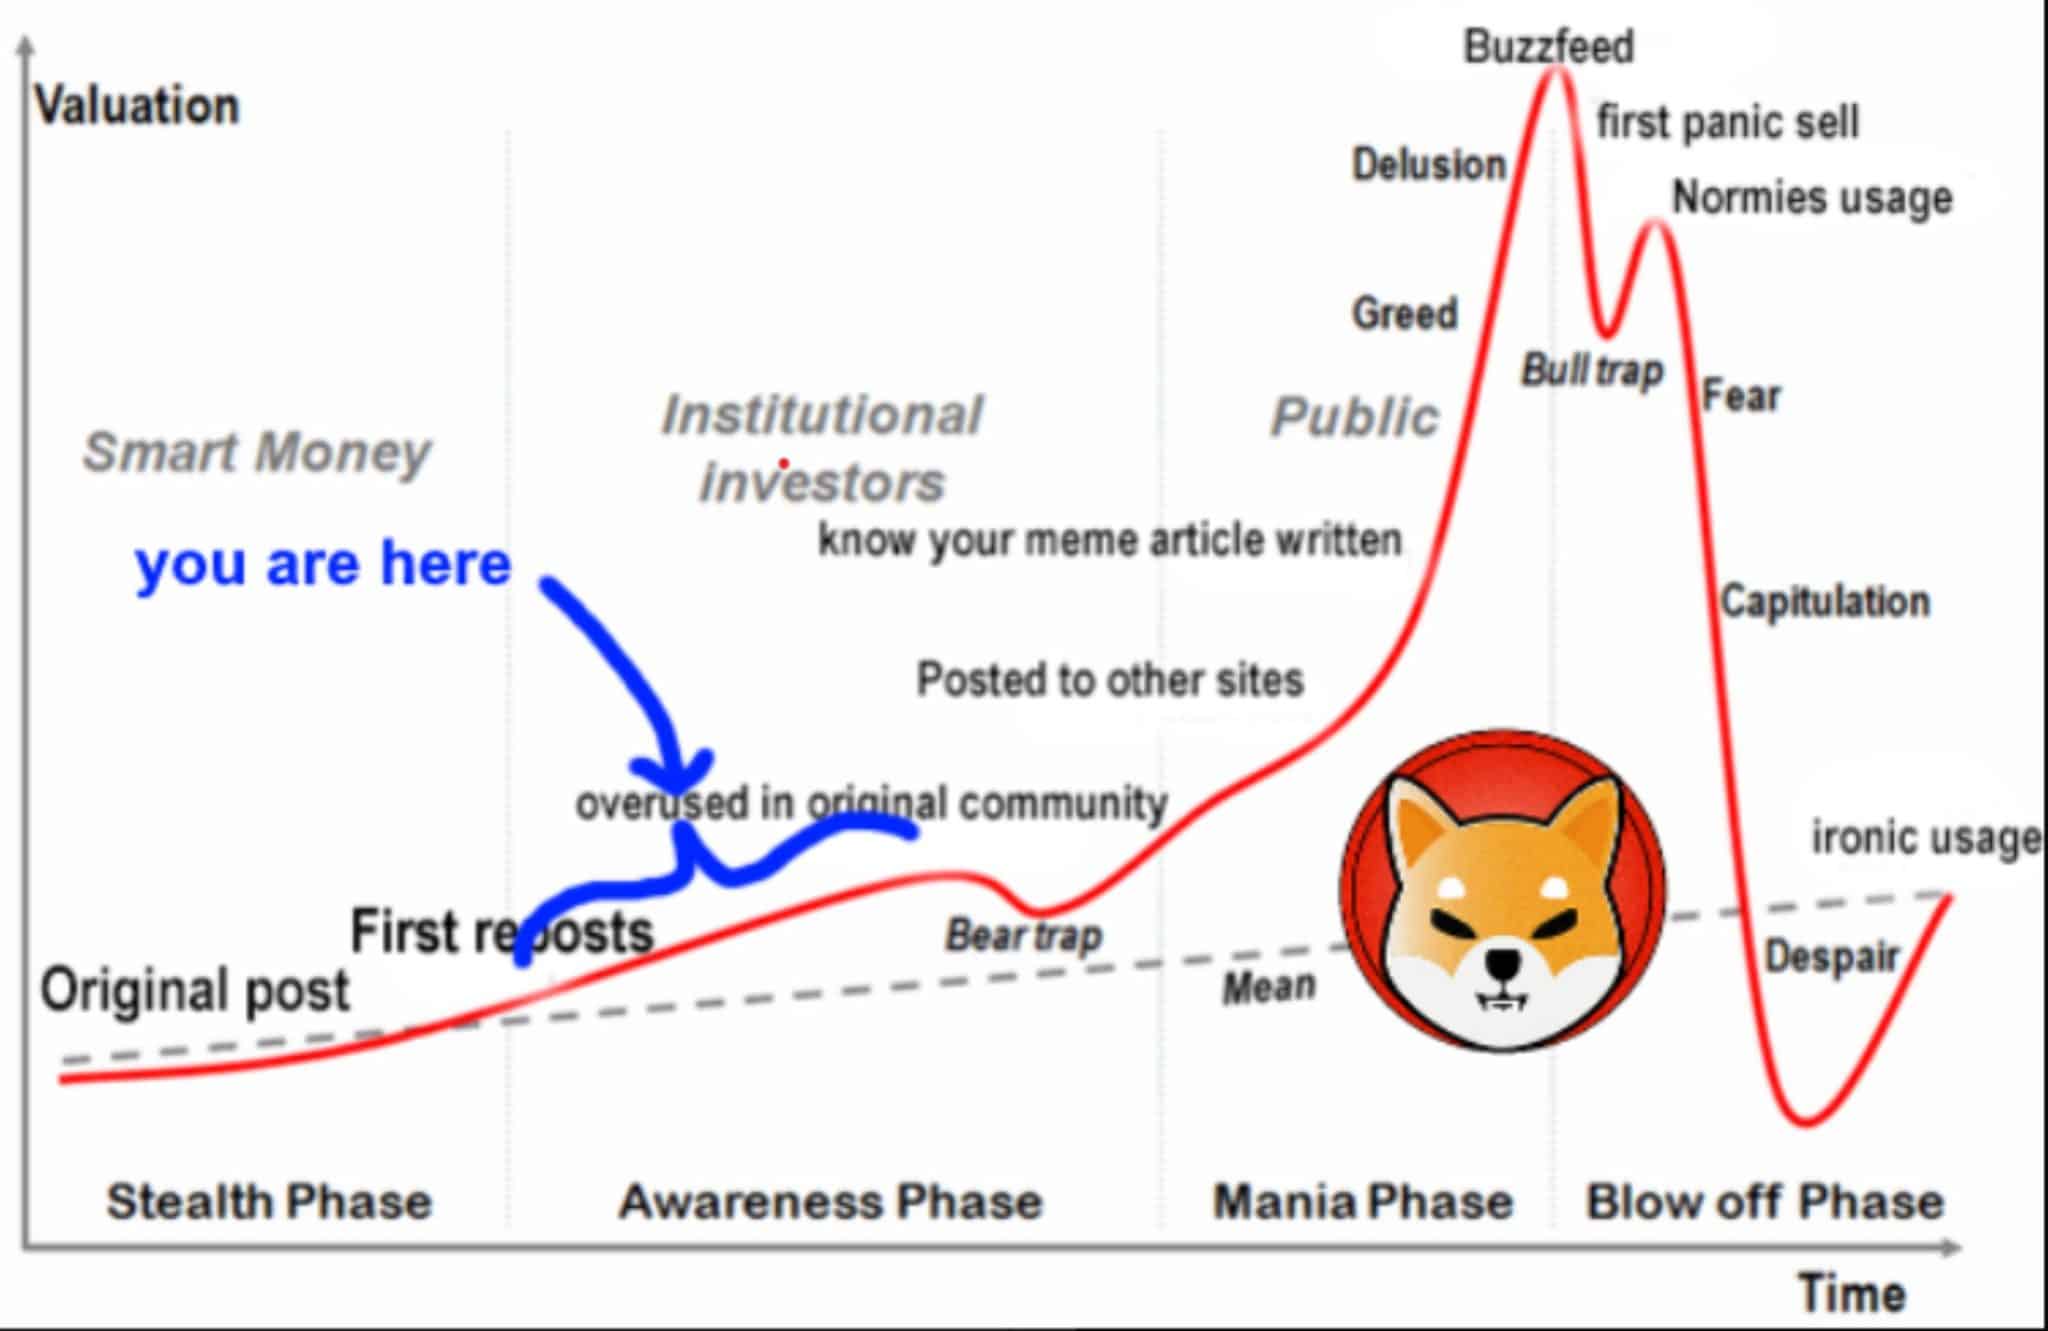 SHIB Price Analysis: After tumultuous tumble, Shiba Inu price could be ready for big pump if SHIB Army can hold - will they answer the calls?